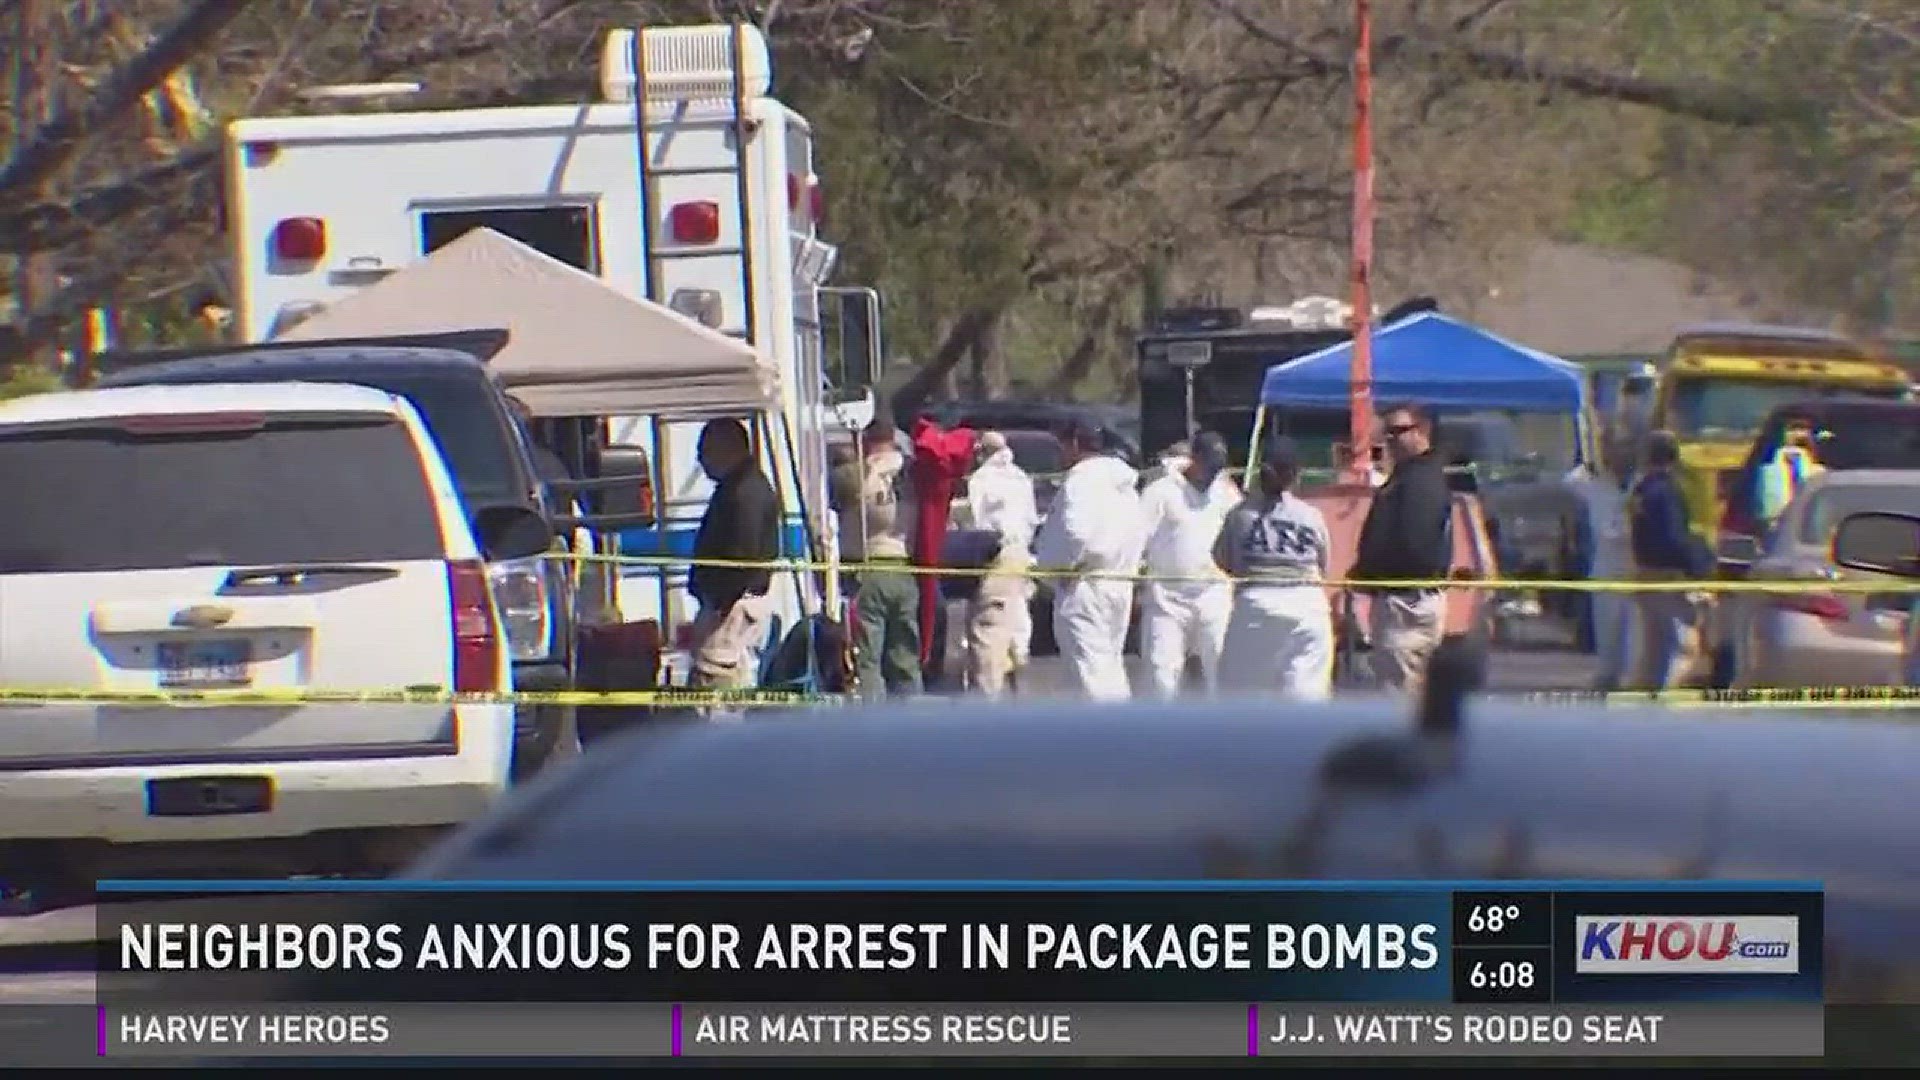 Over the span of 10 days, three explosions have come from packages that were placed on the front door steps at three different homes in Austin. Two people were killed in total.